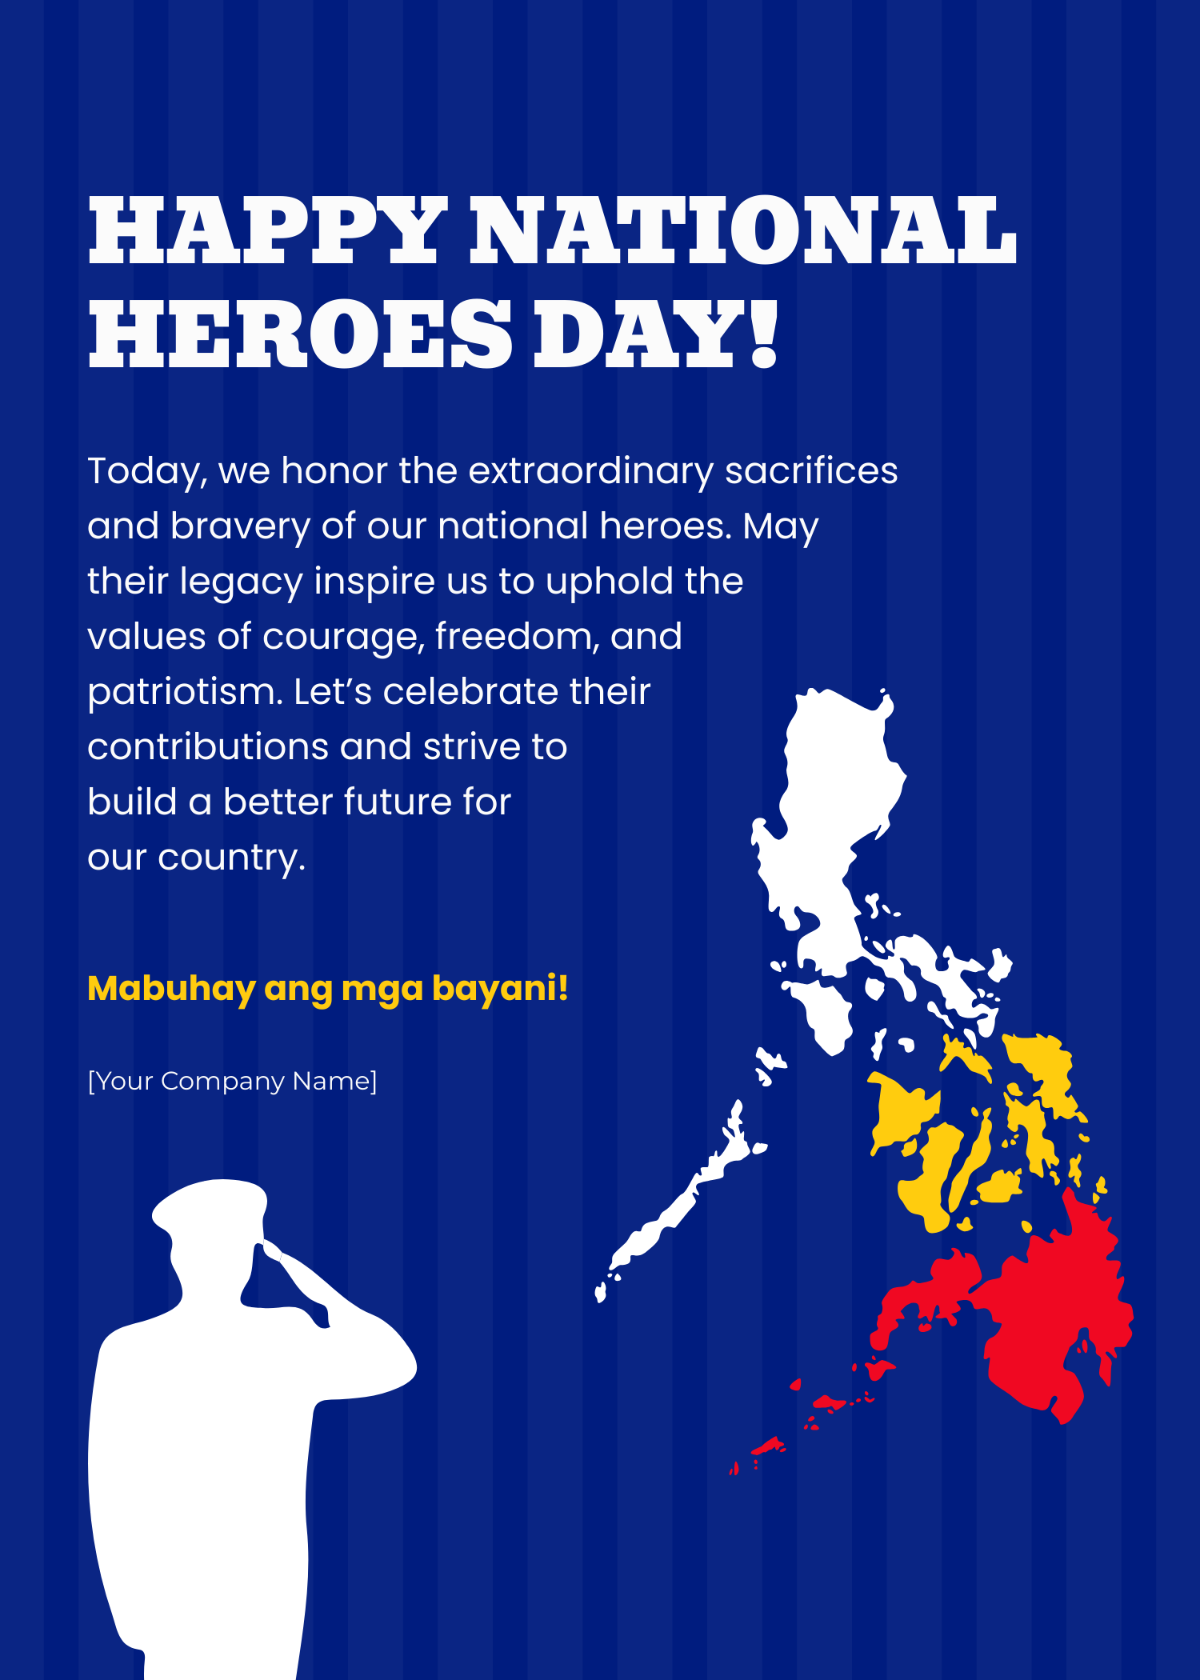 Happy National Heroes Day Greeting